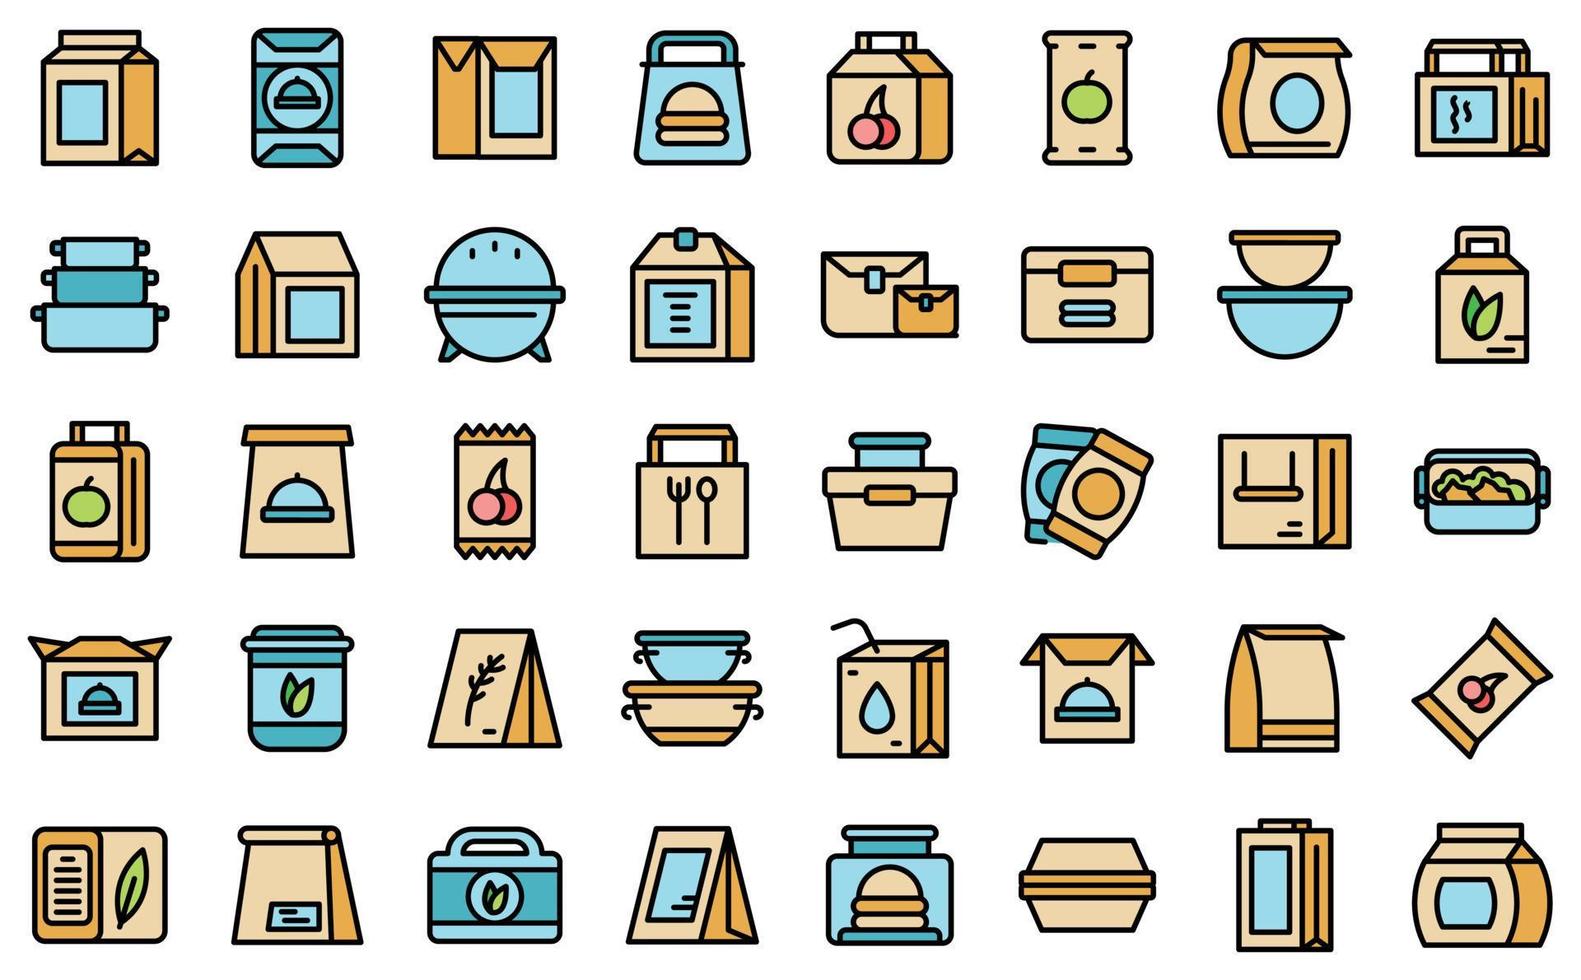 Snack pack icons set vector flat